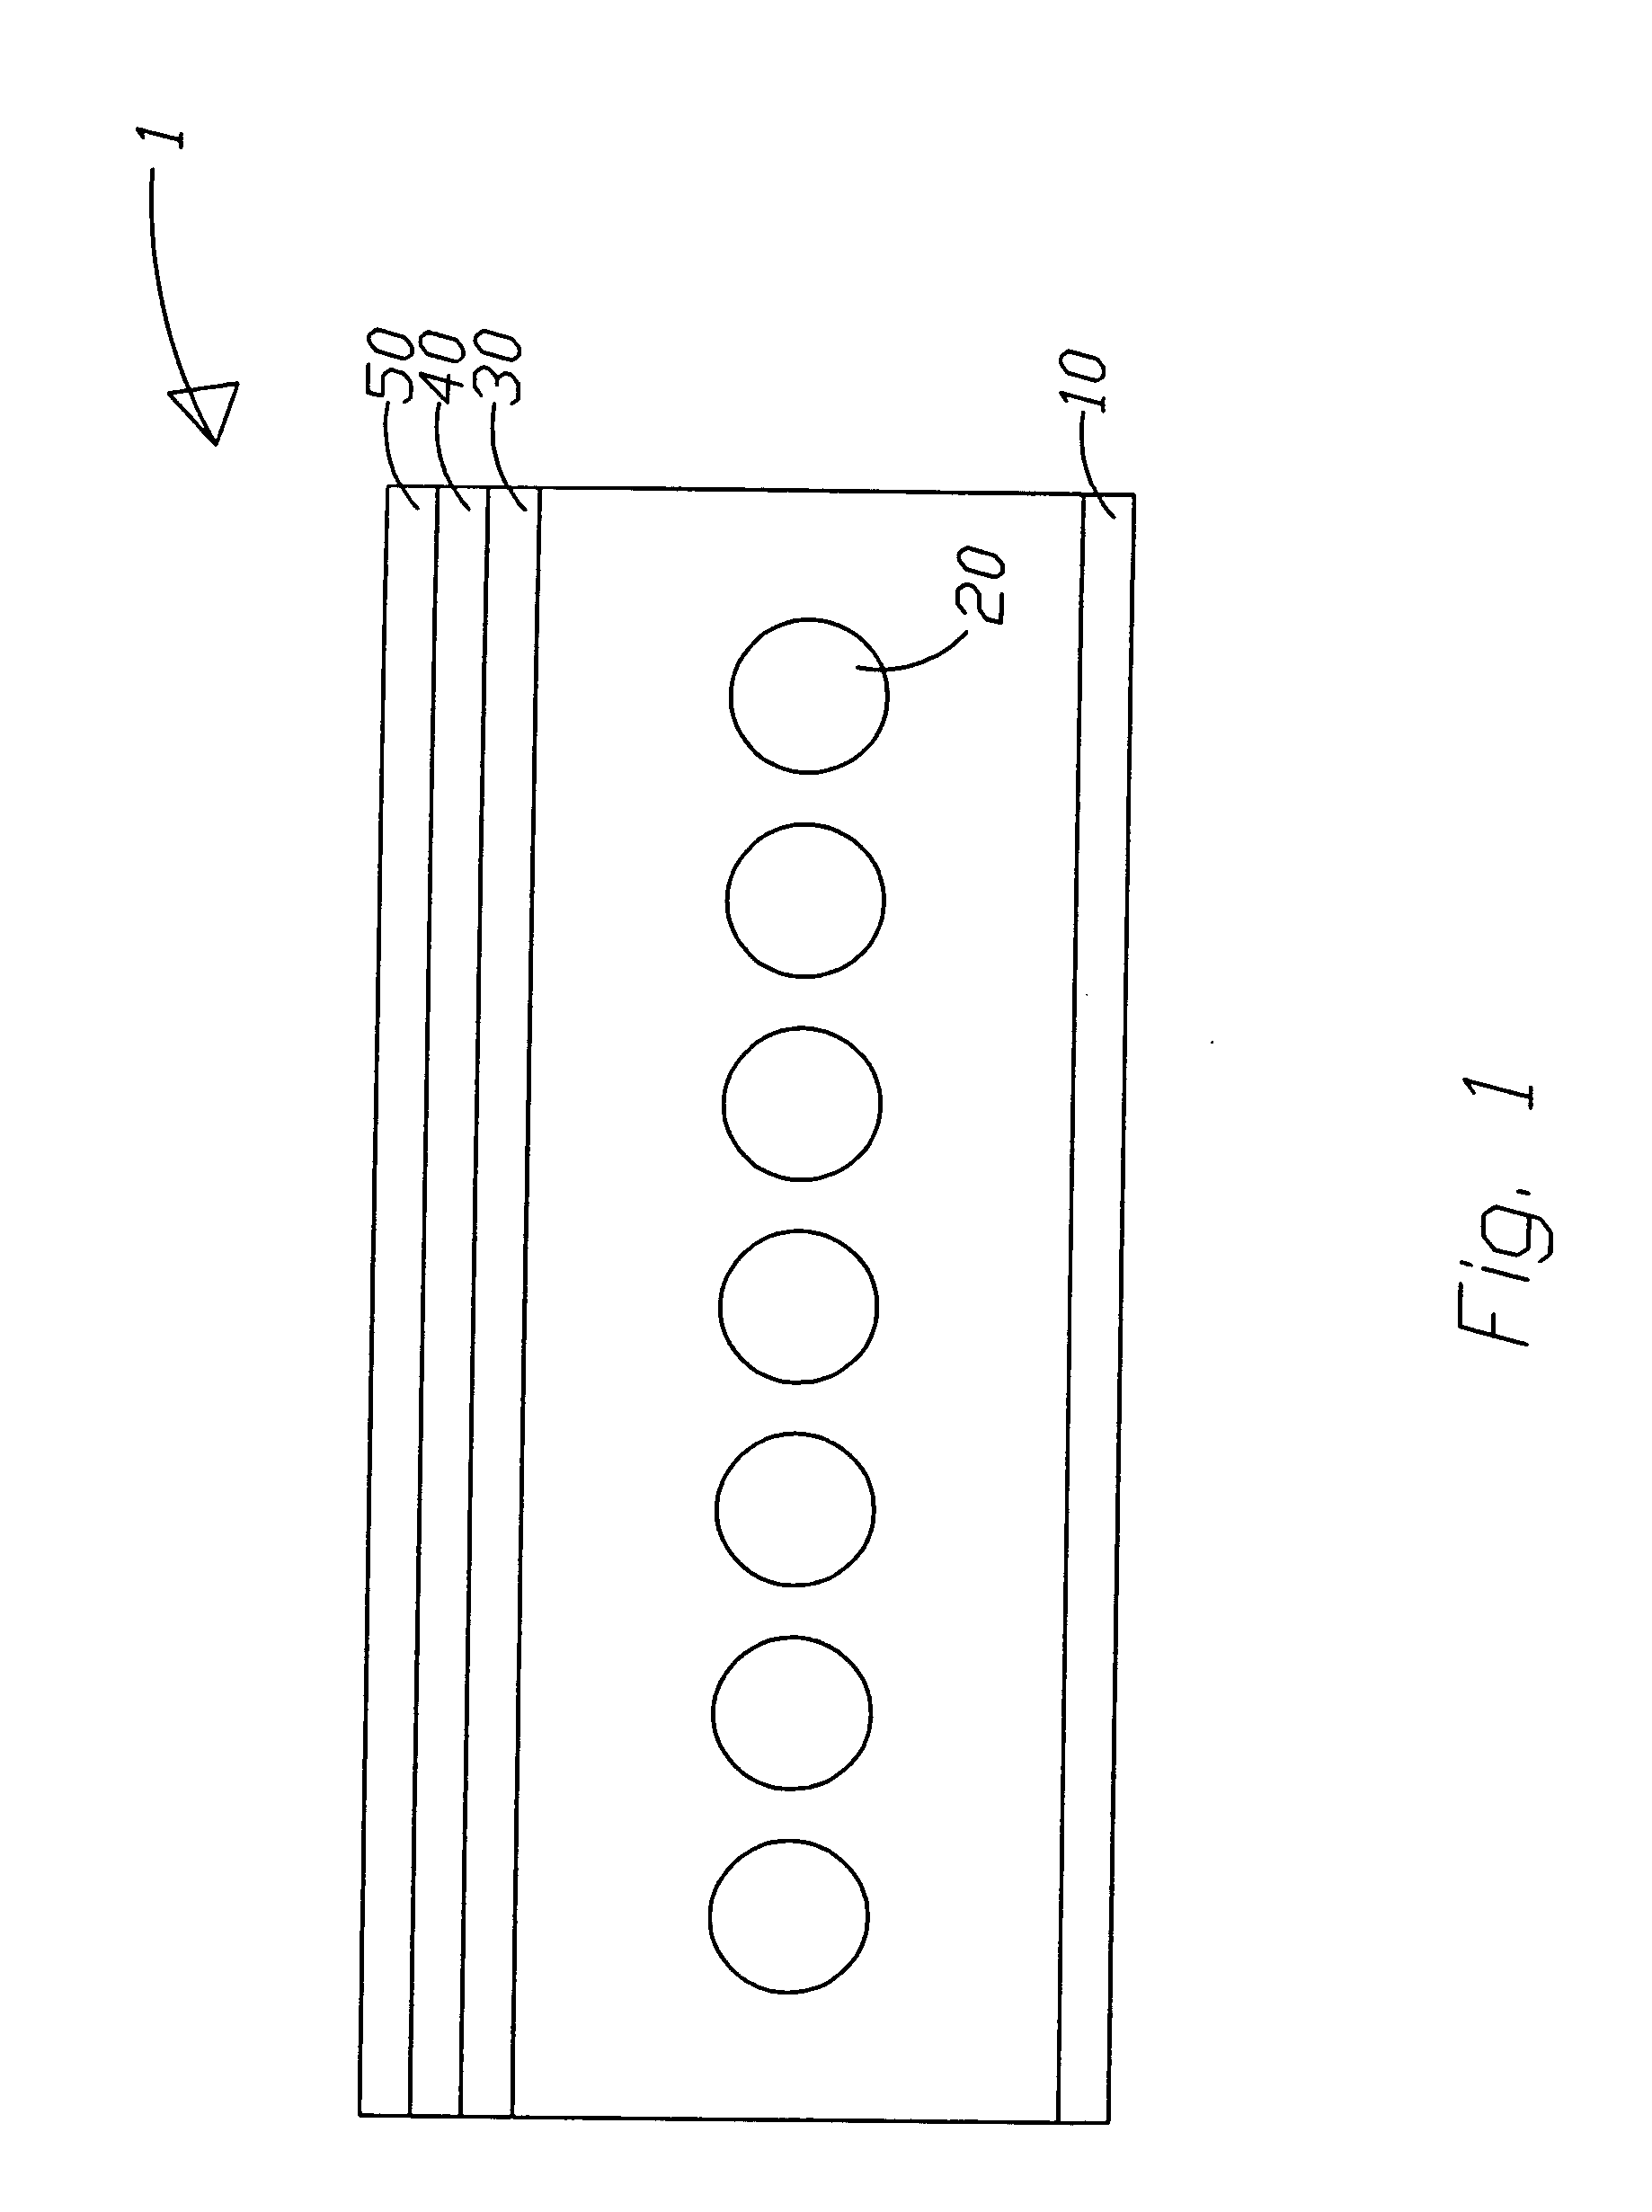 Structure of direct type backlight module with high uniform emitting light